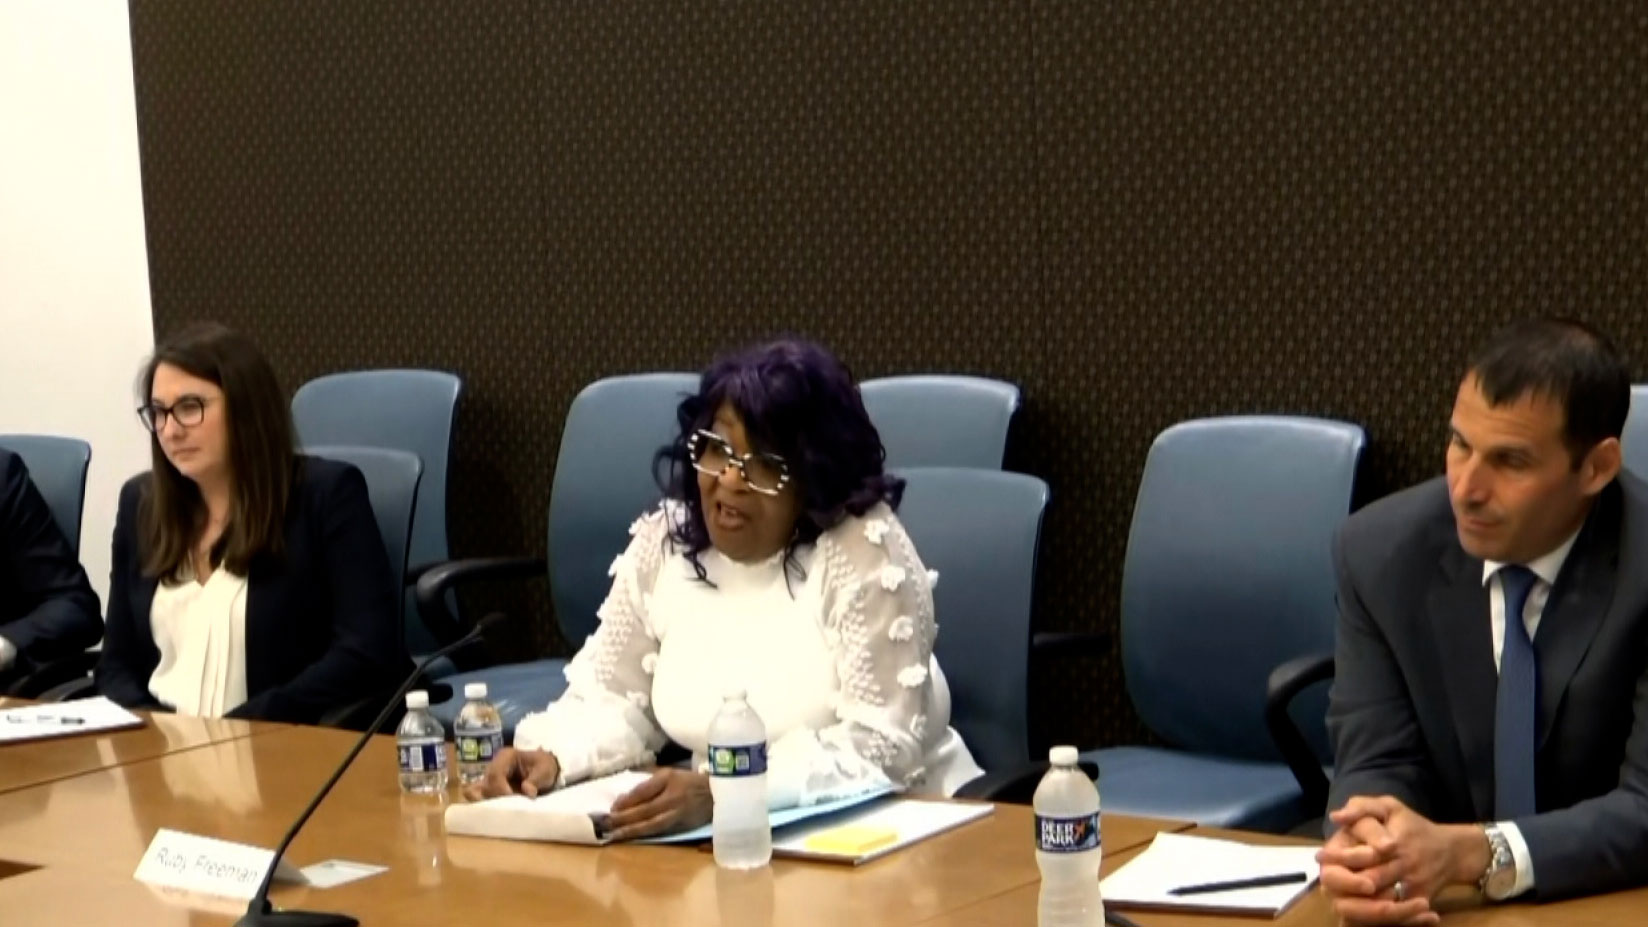 Ruby Freeman's video testimony was played during the hearing on Tuesday.